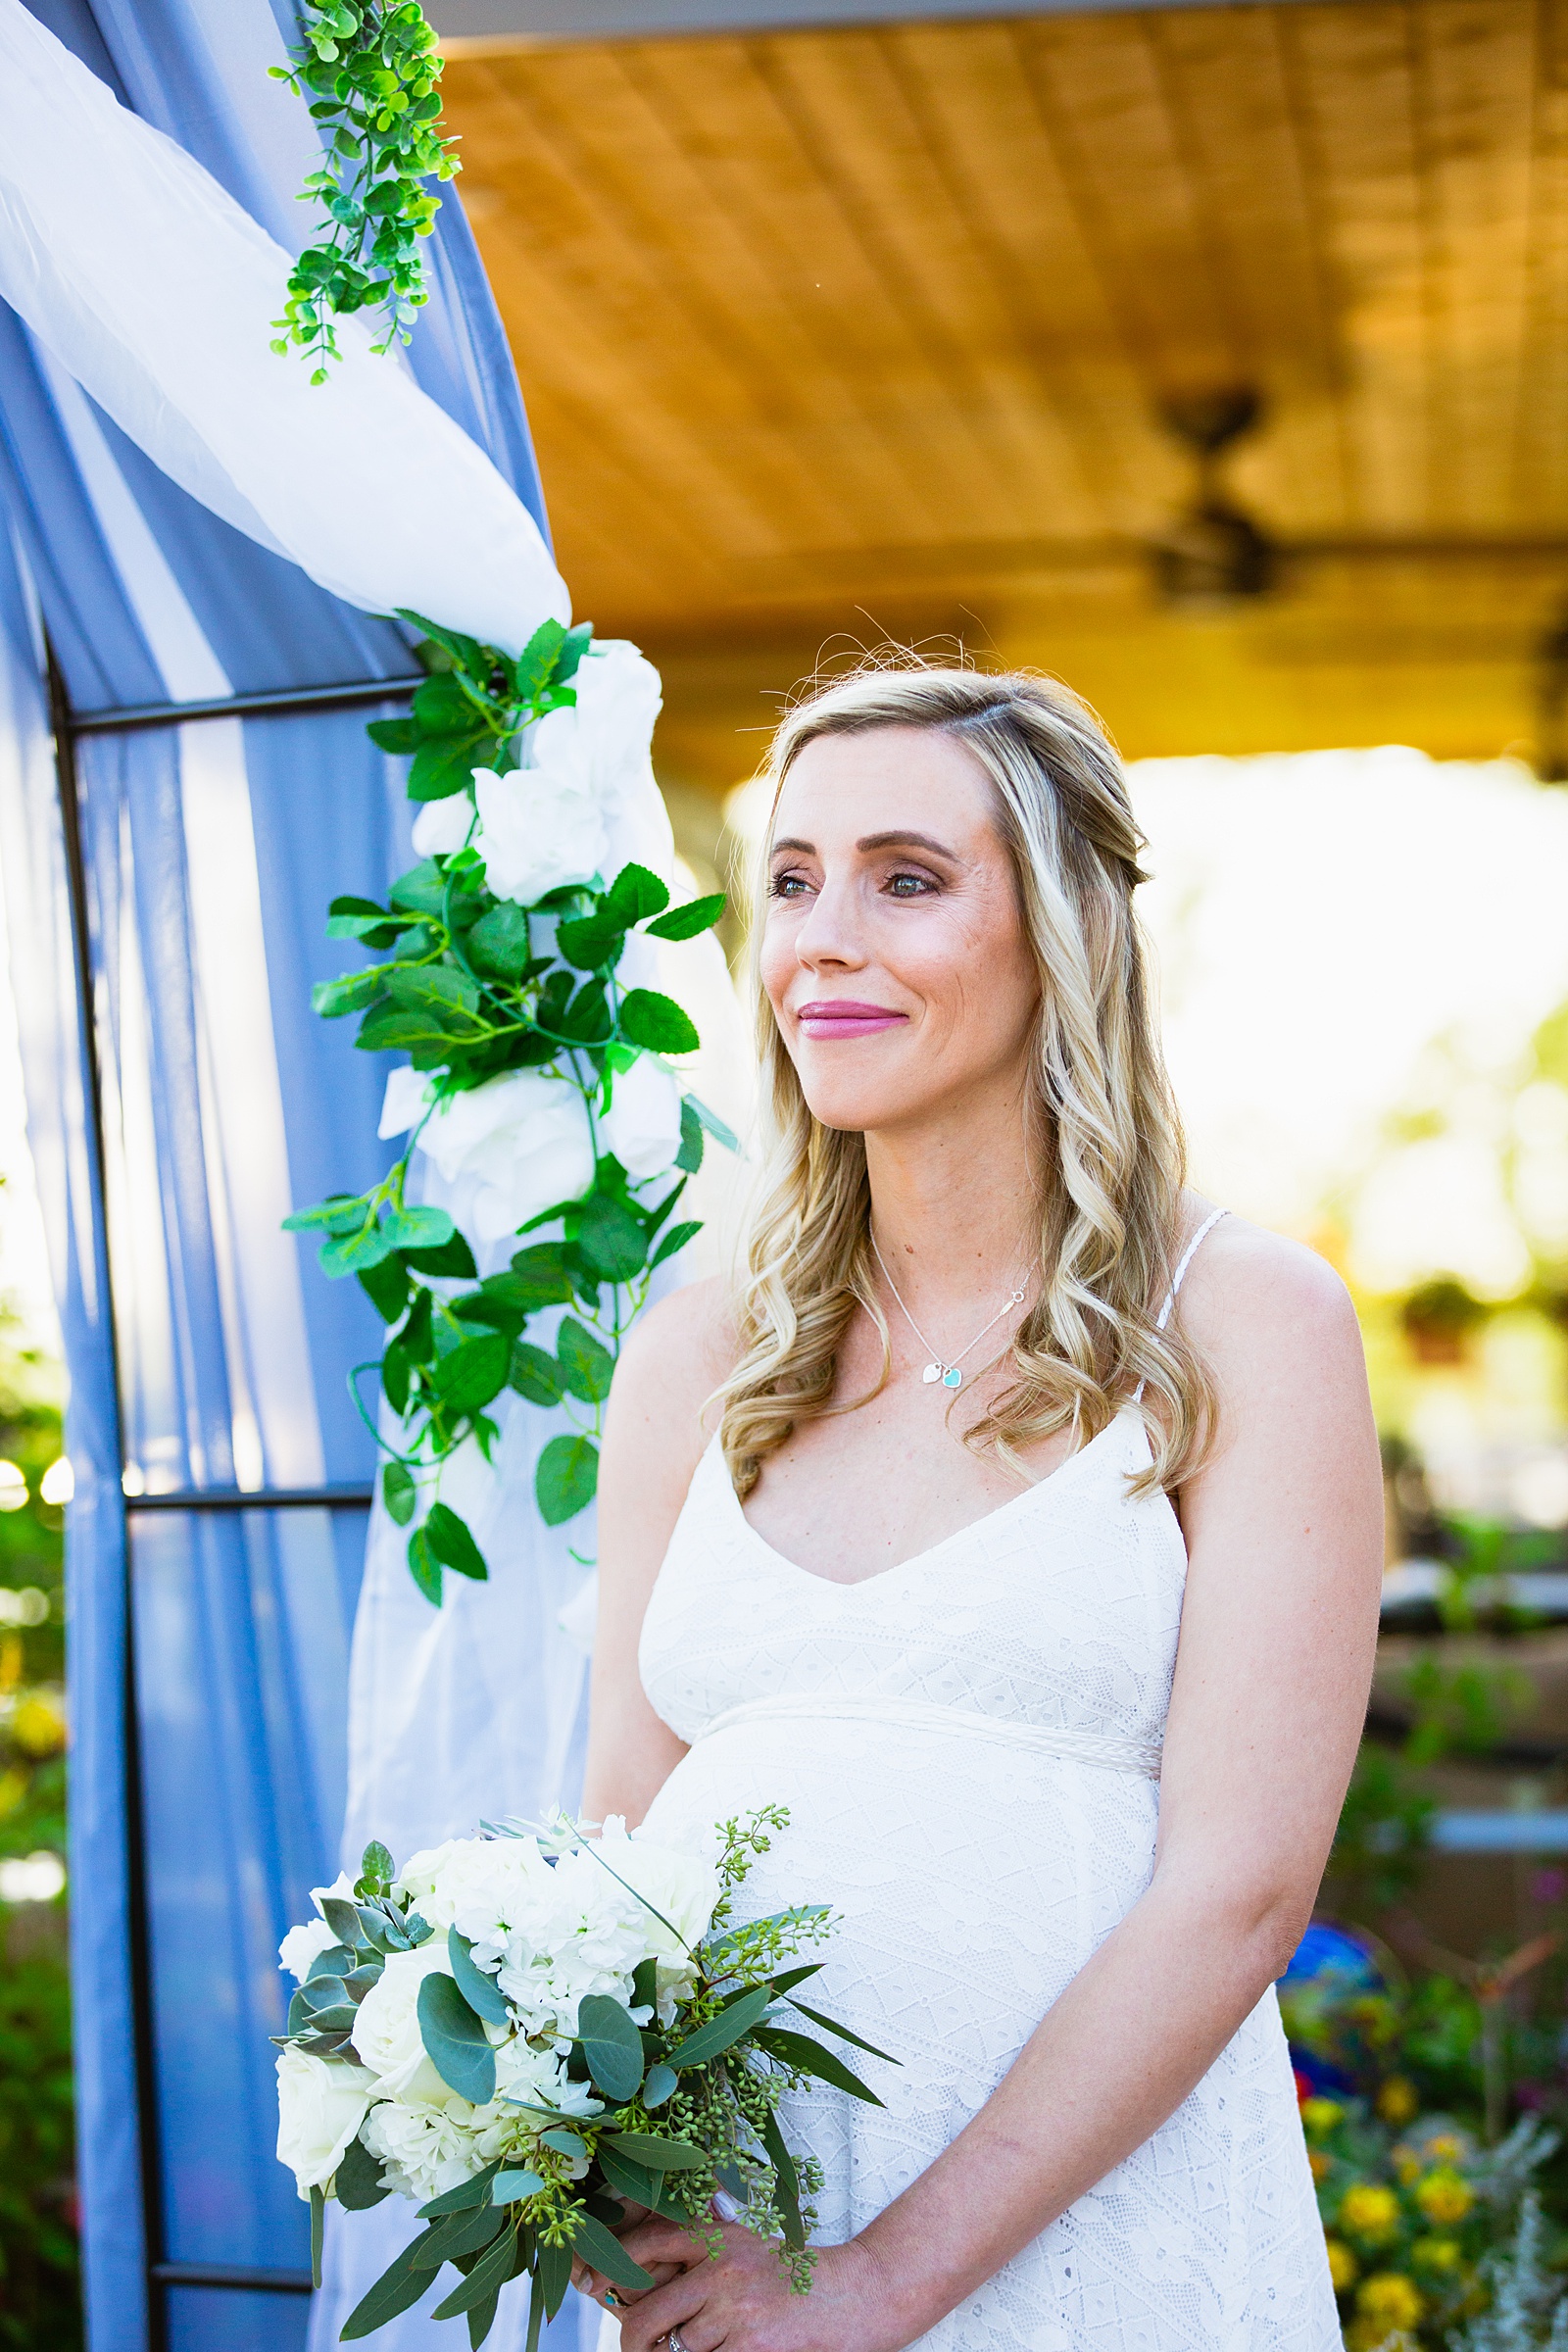 Bride looking at her groom during their wedding ceremony at a backyard by Scottsdale wedding photographer PMA Photography.